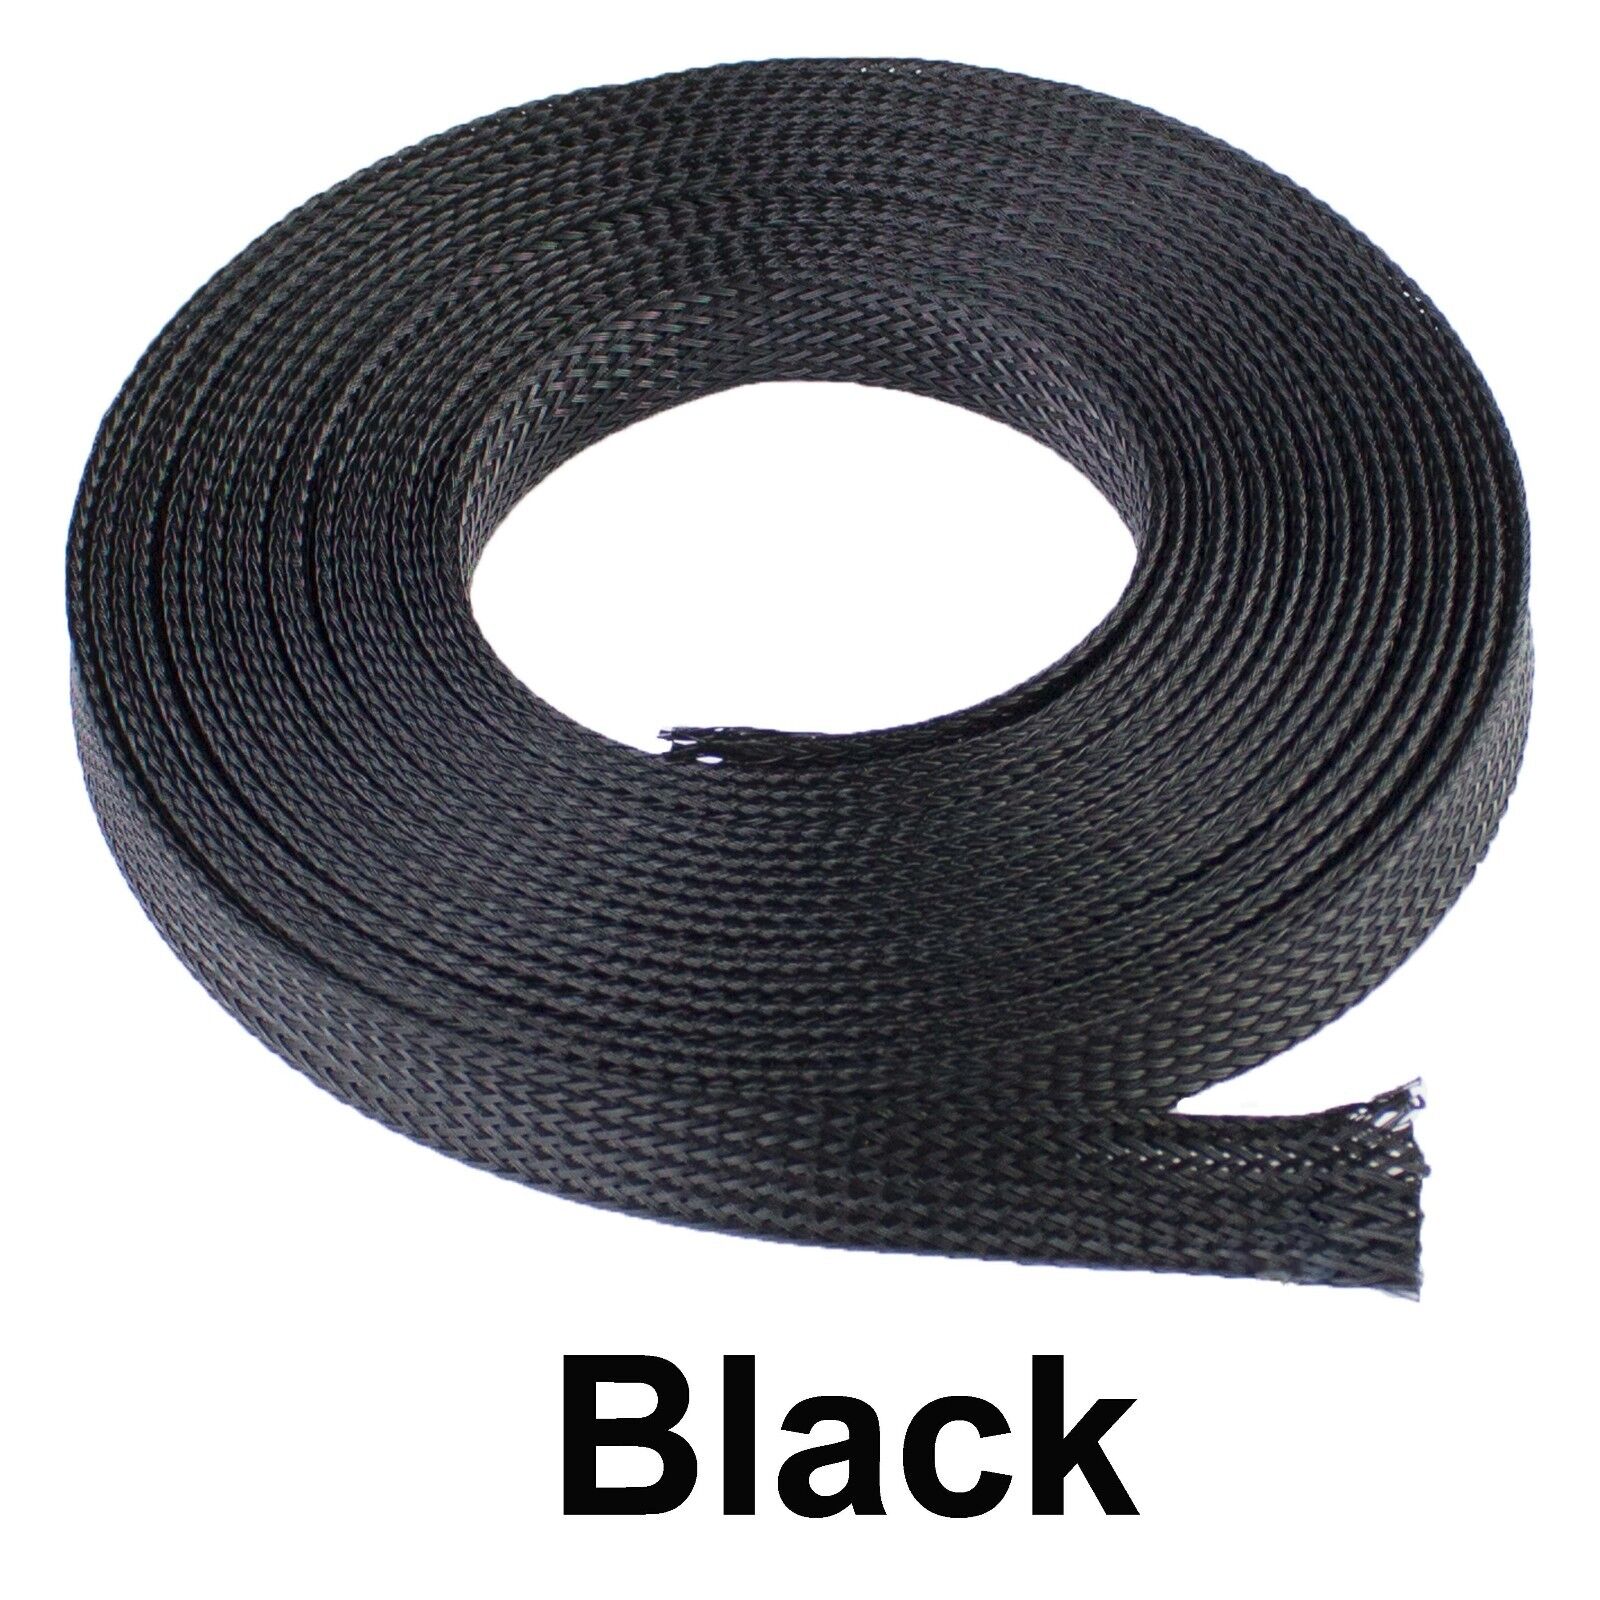 ALL SIZES & COLORS 5' FT - 100 Feet Expandable Cable Sleeving Braided Tubing LOT